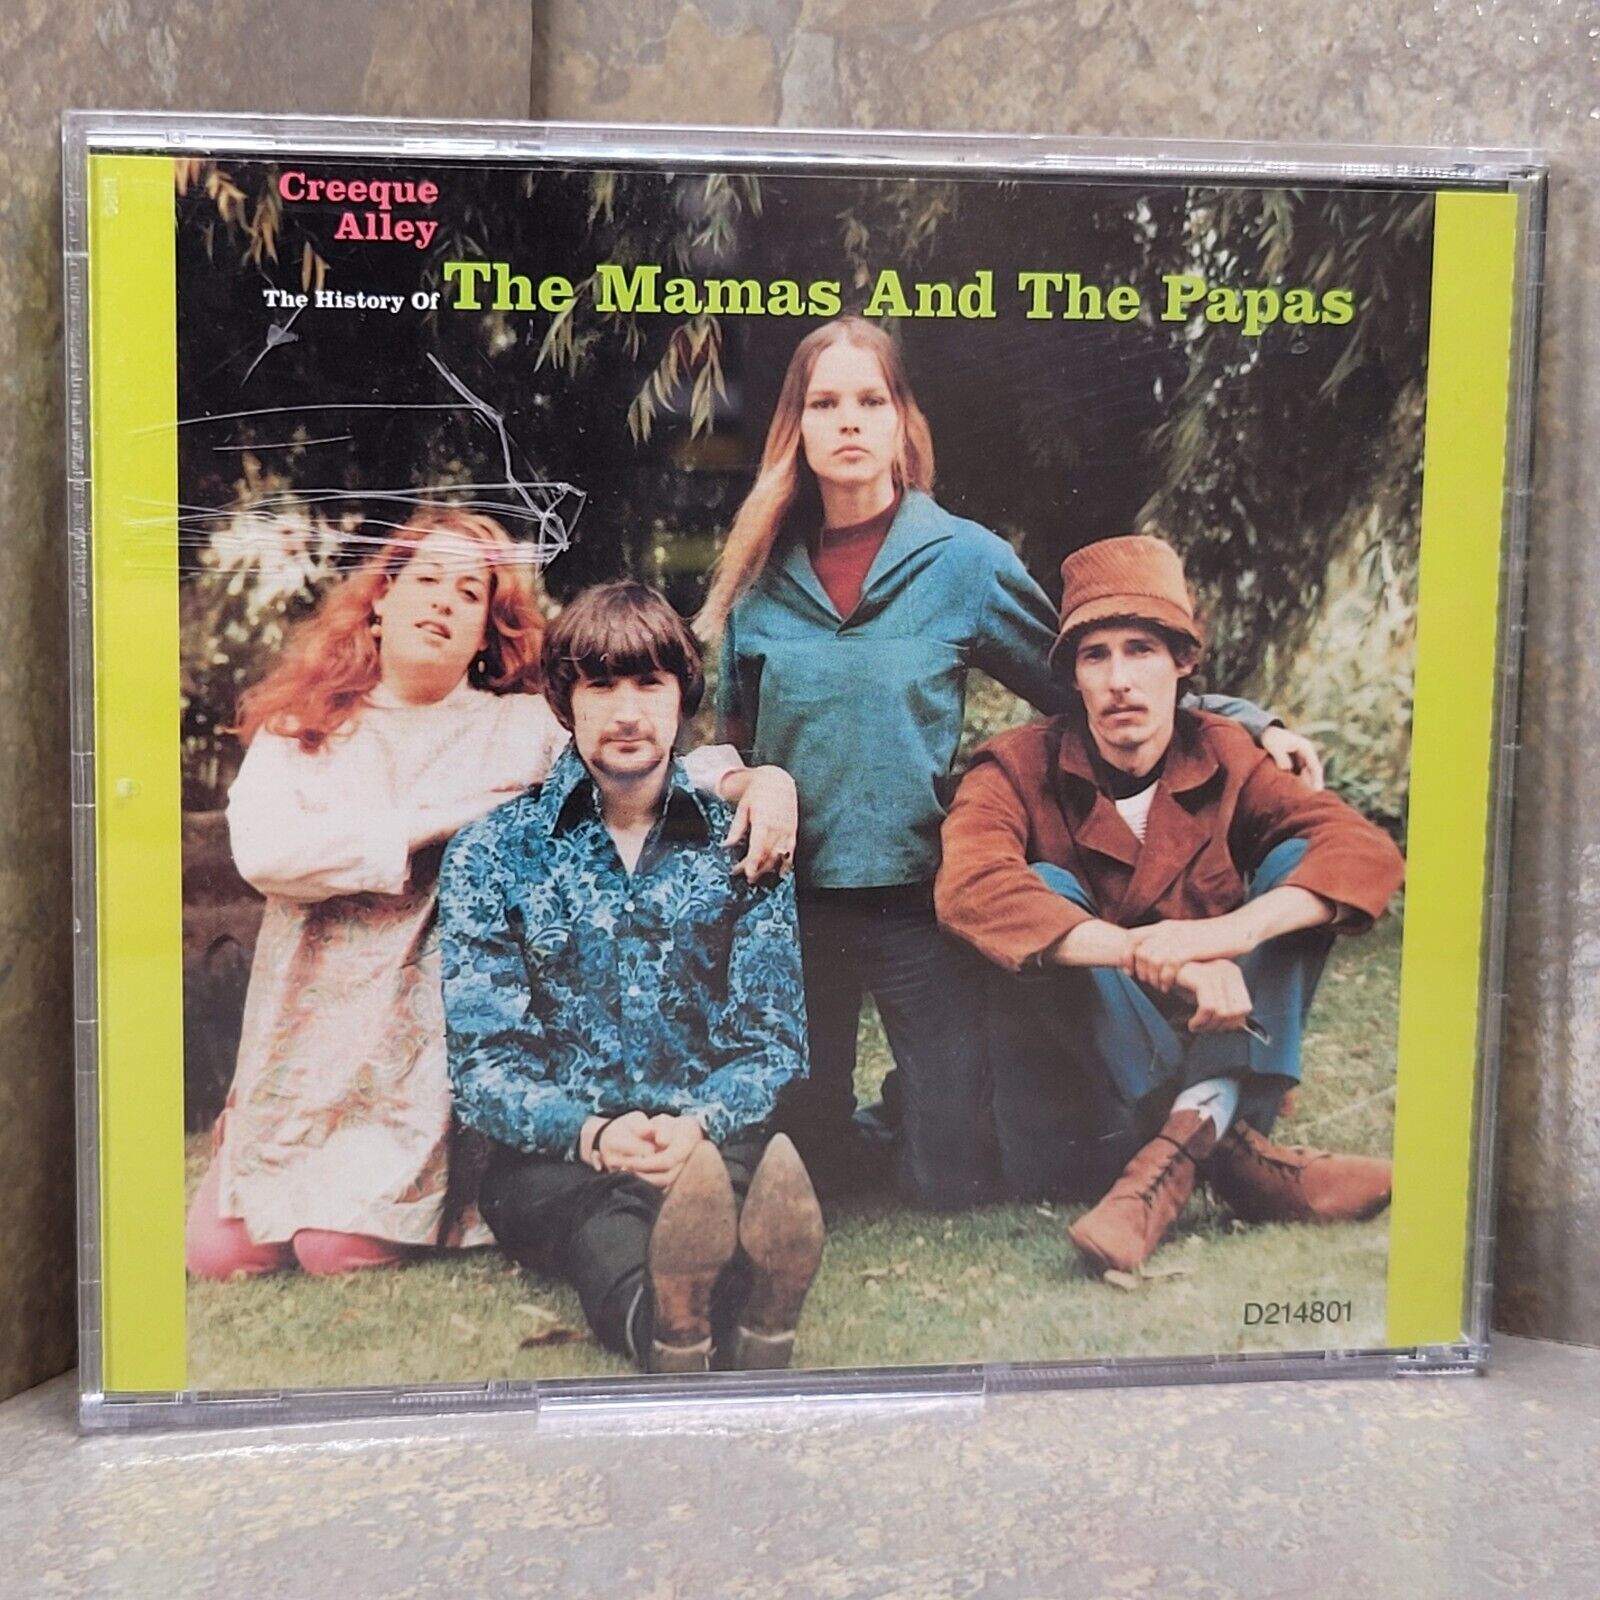 The History of The Mamas And The Papas- Creeque Alley 